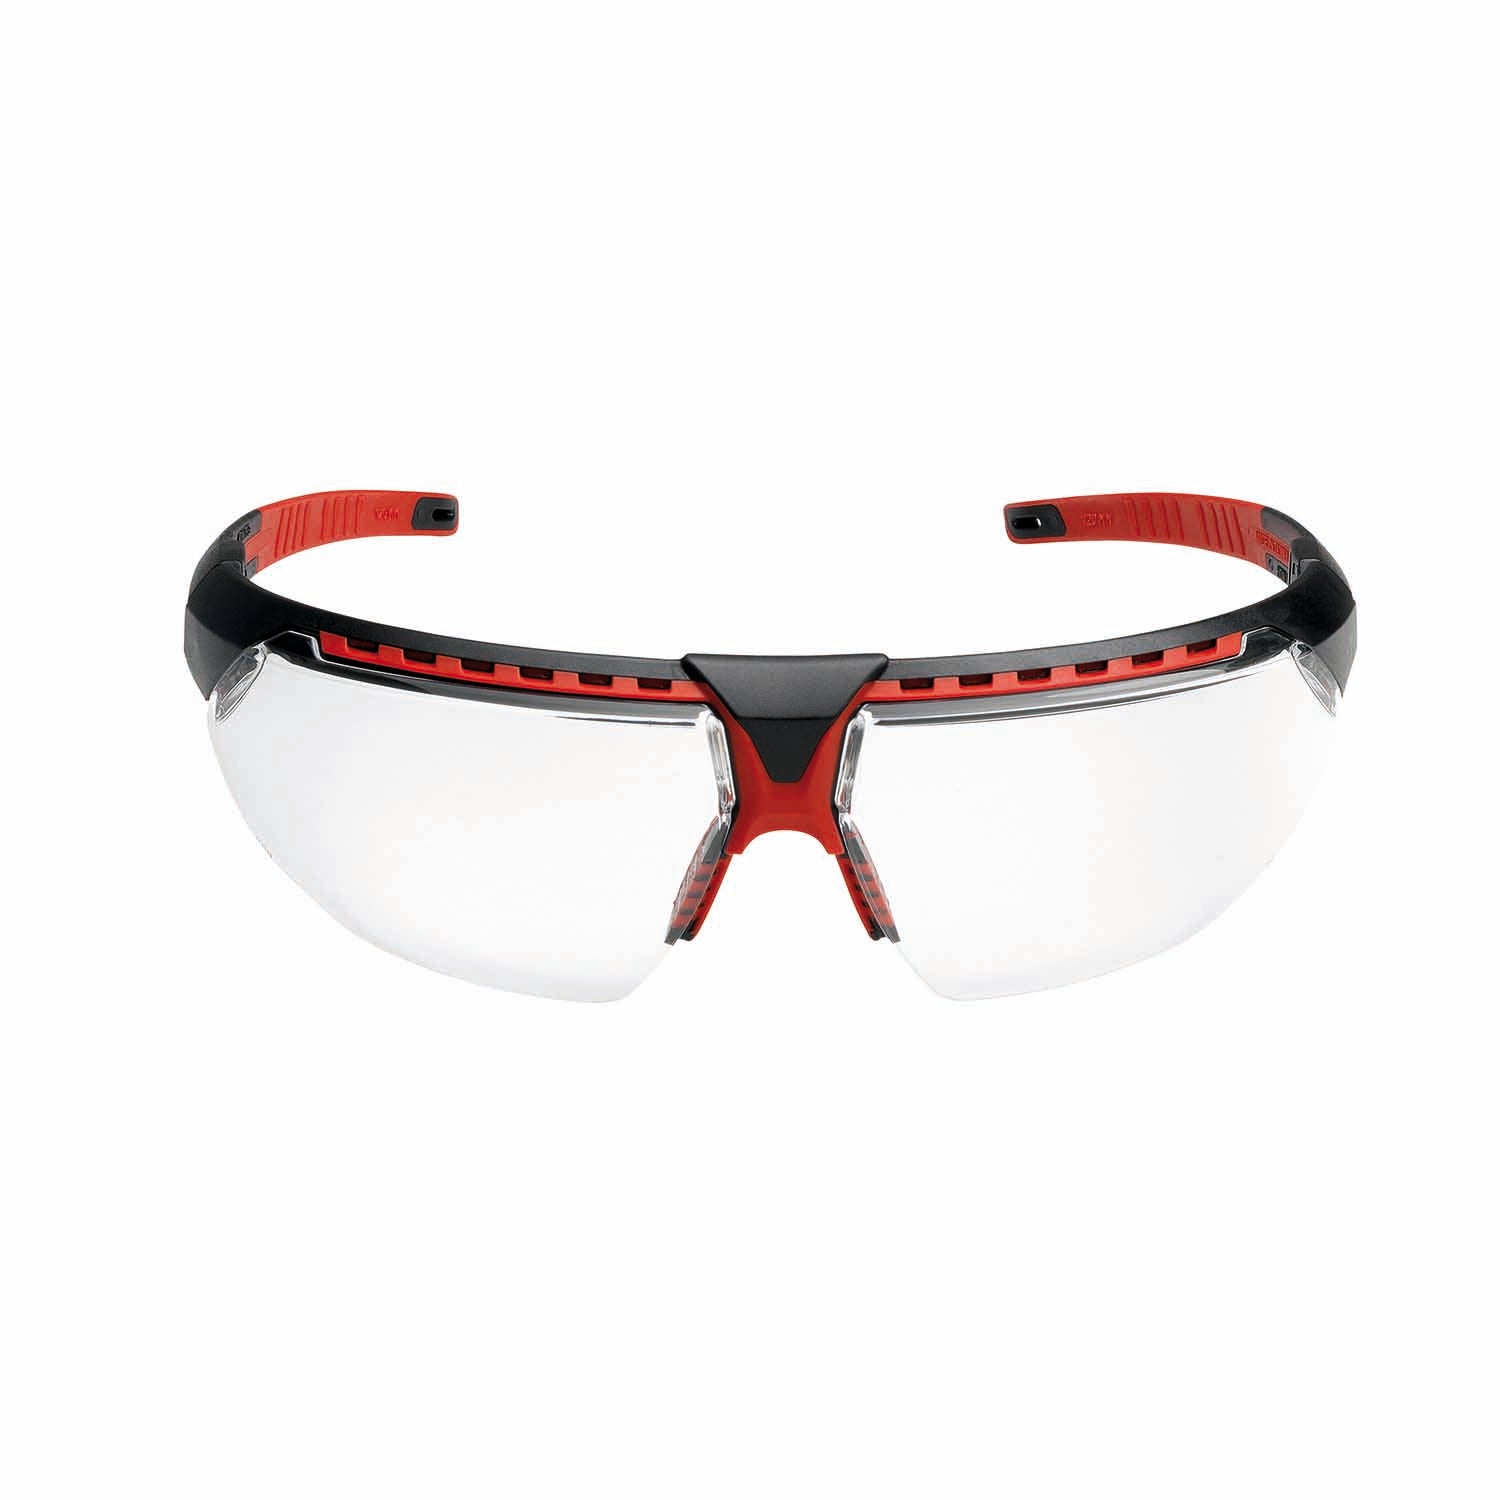 Honeywell avatar safety spectacles clear lens black red frame